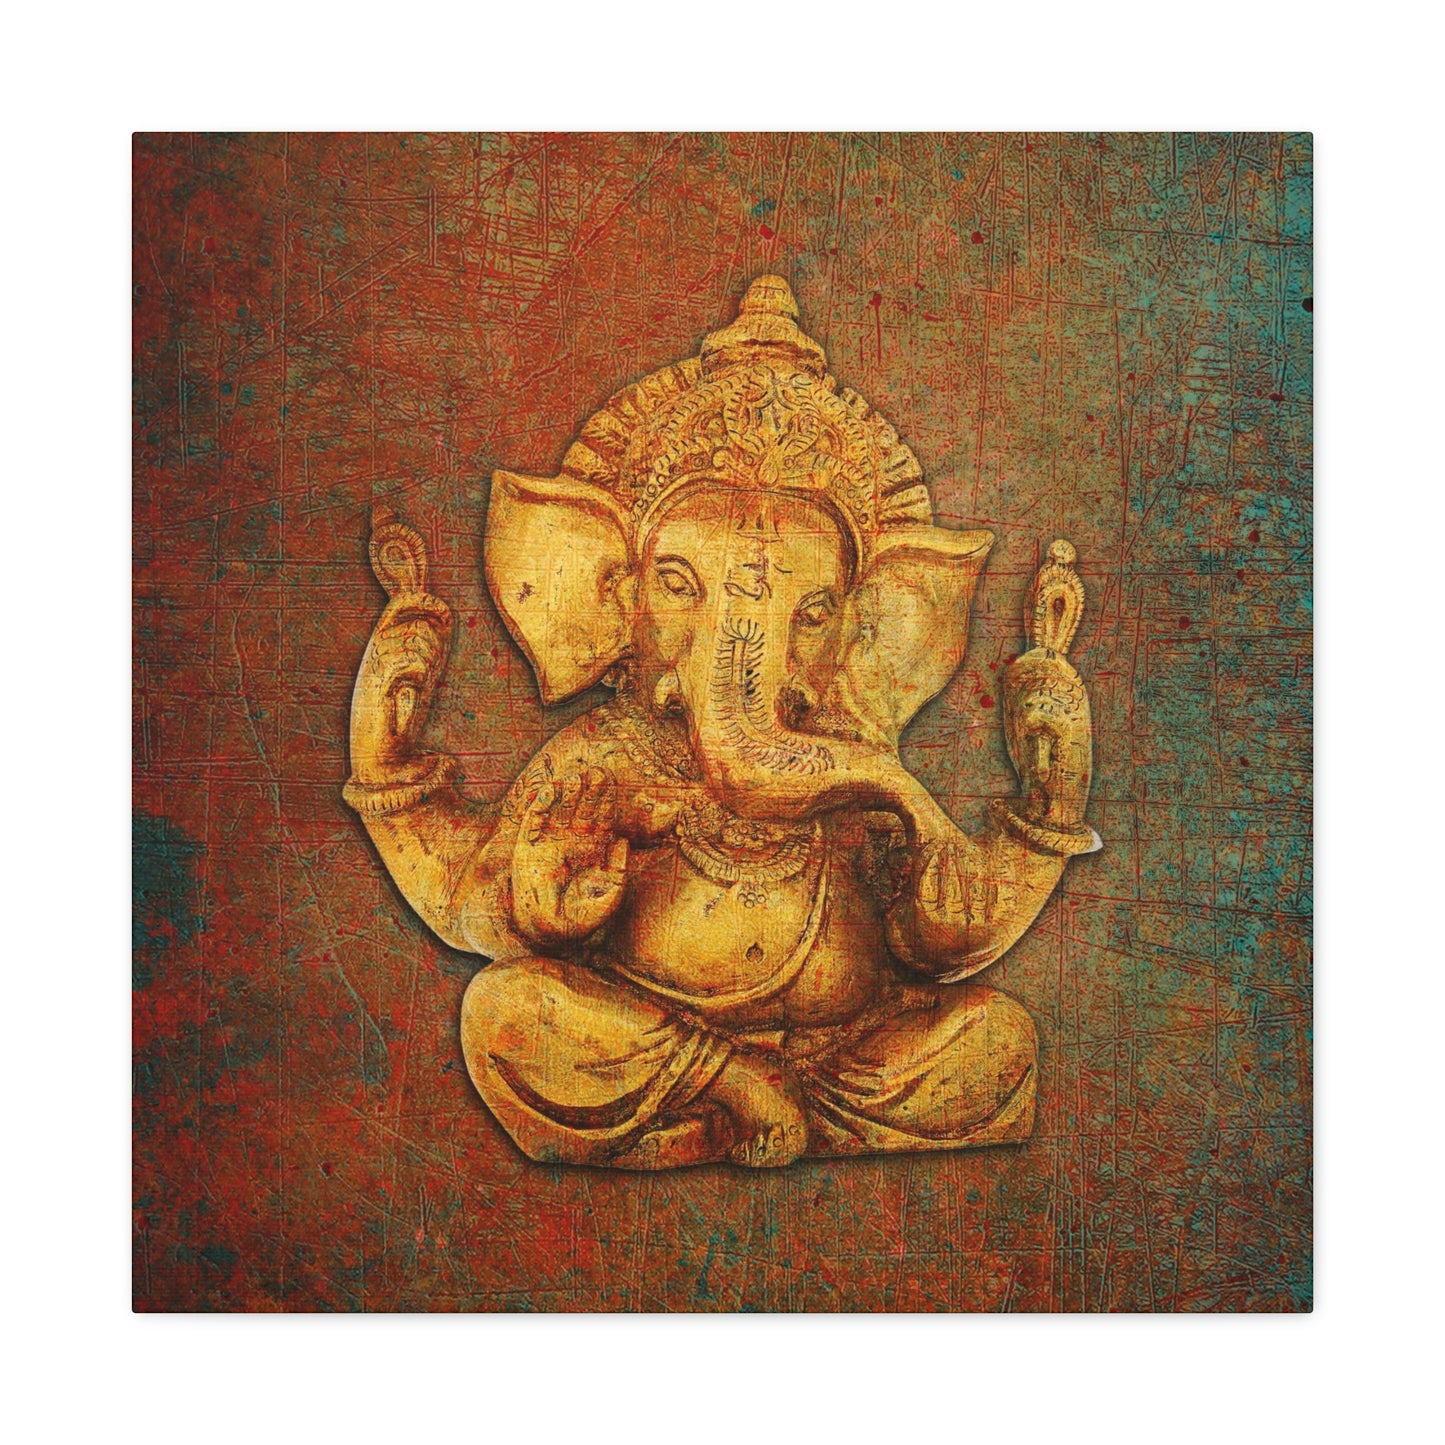 Hinduism Themed Wall Art - Ganesha on a Distressed Background Printed on Unframed Stretched Canvas